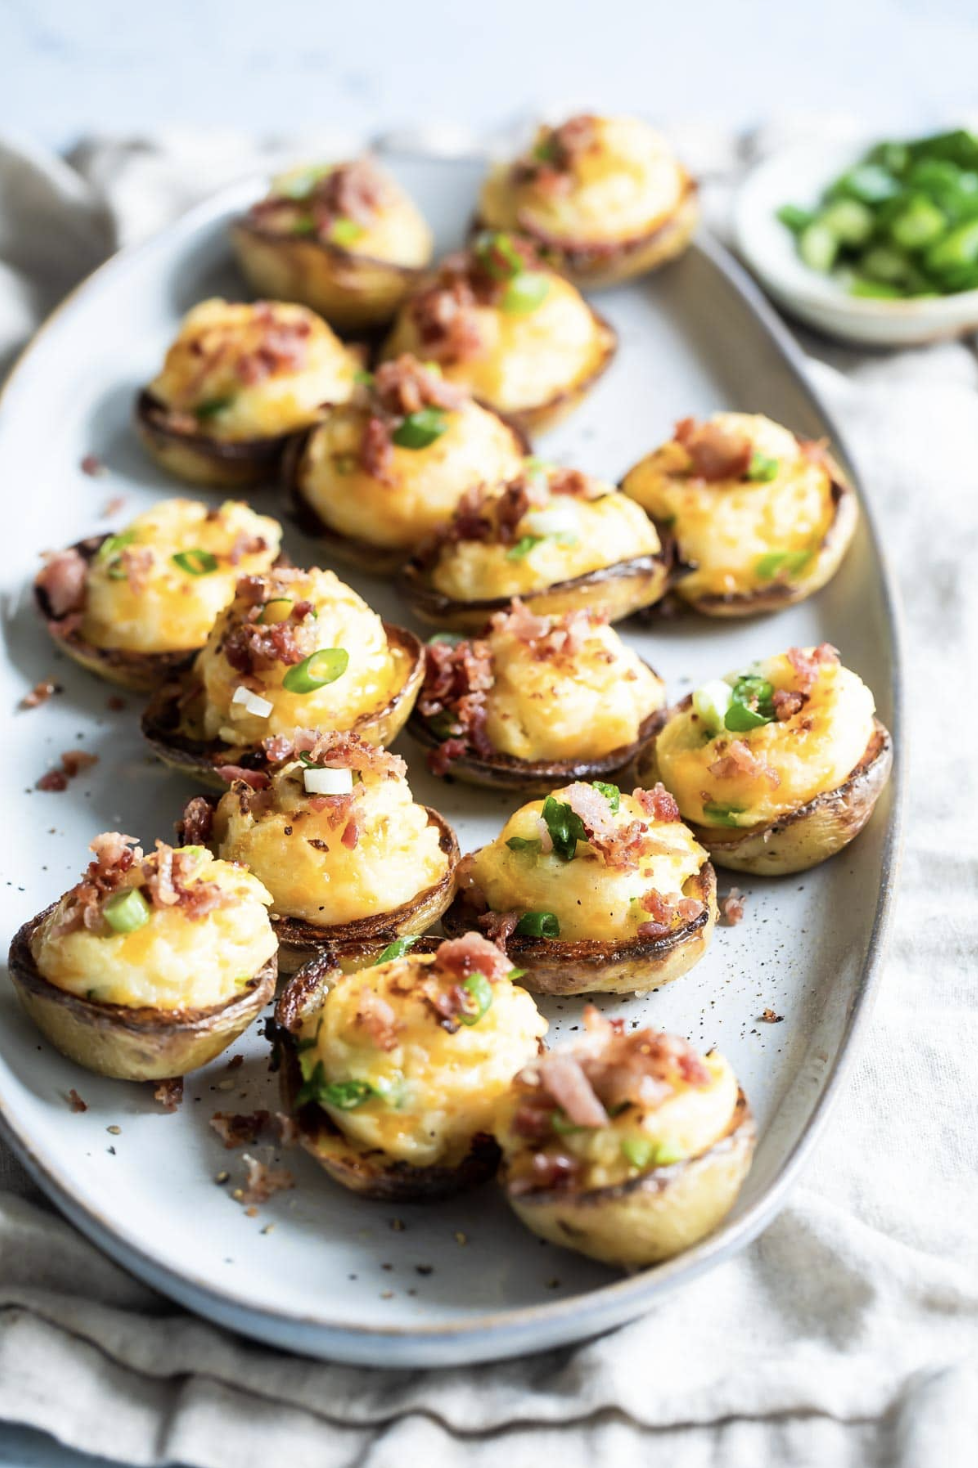 76 Yummy, Filling Potato Recipes For Any Day Of The Week